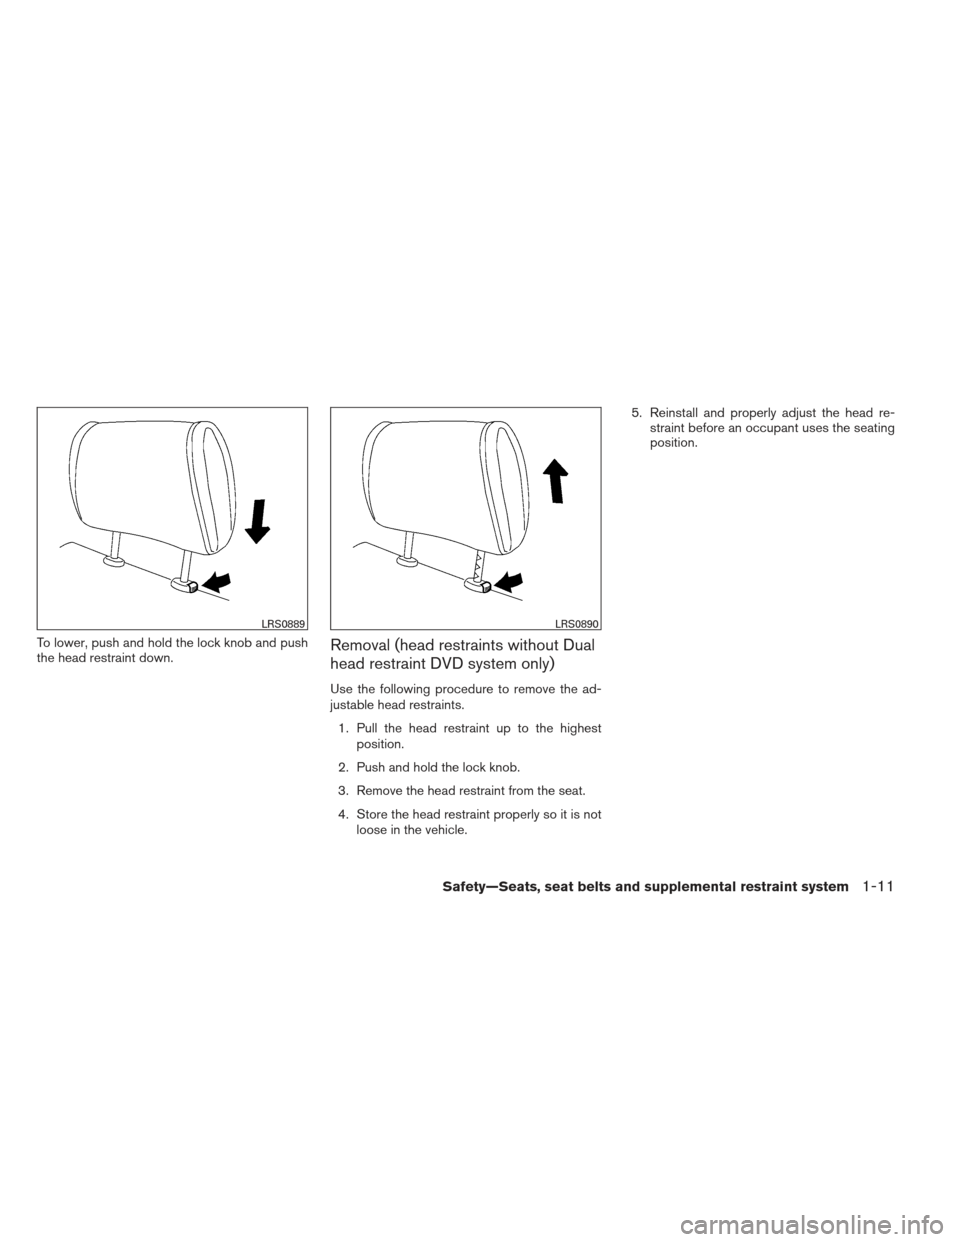 NISSAN PATHFINDER 2013 R52 / 4.G Owners Manual To lower, push and hold the lock knob and push
the head restraint down.Removal (head restraints without Dual
head restraint DVD system only)
Use the following procedure to remove the ad-
justable head